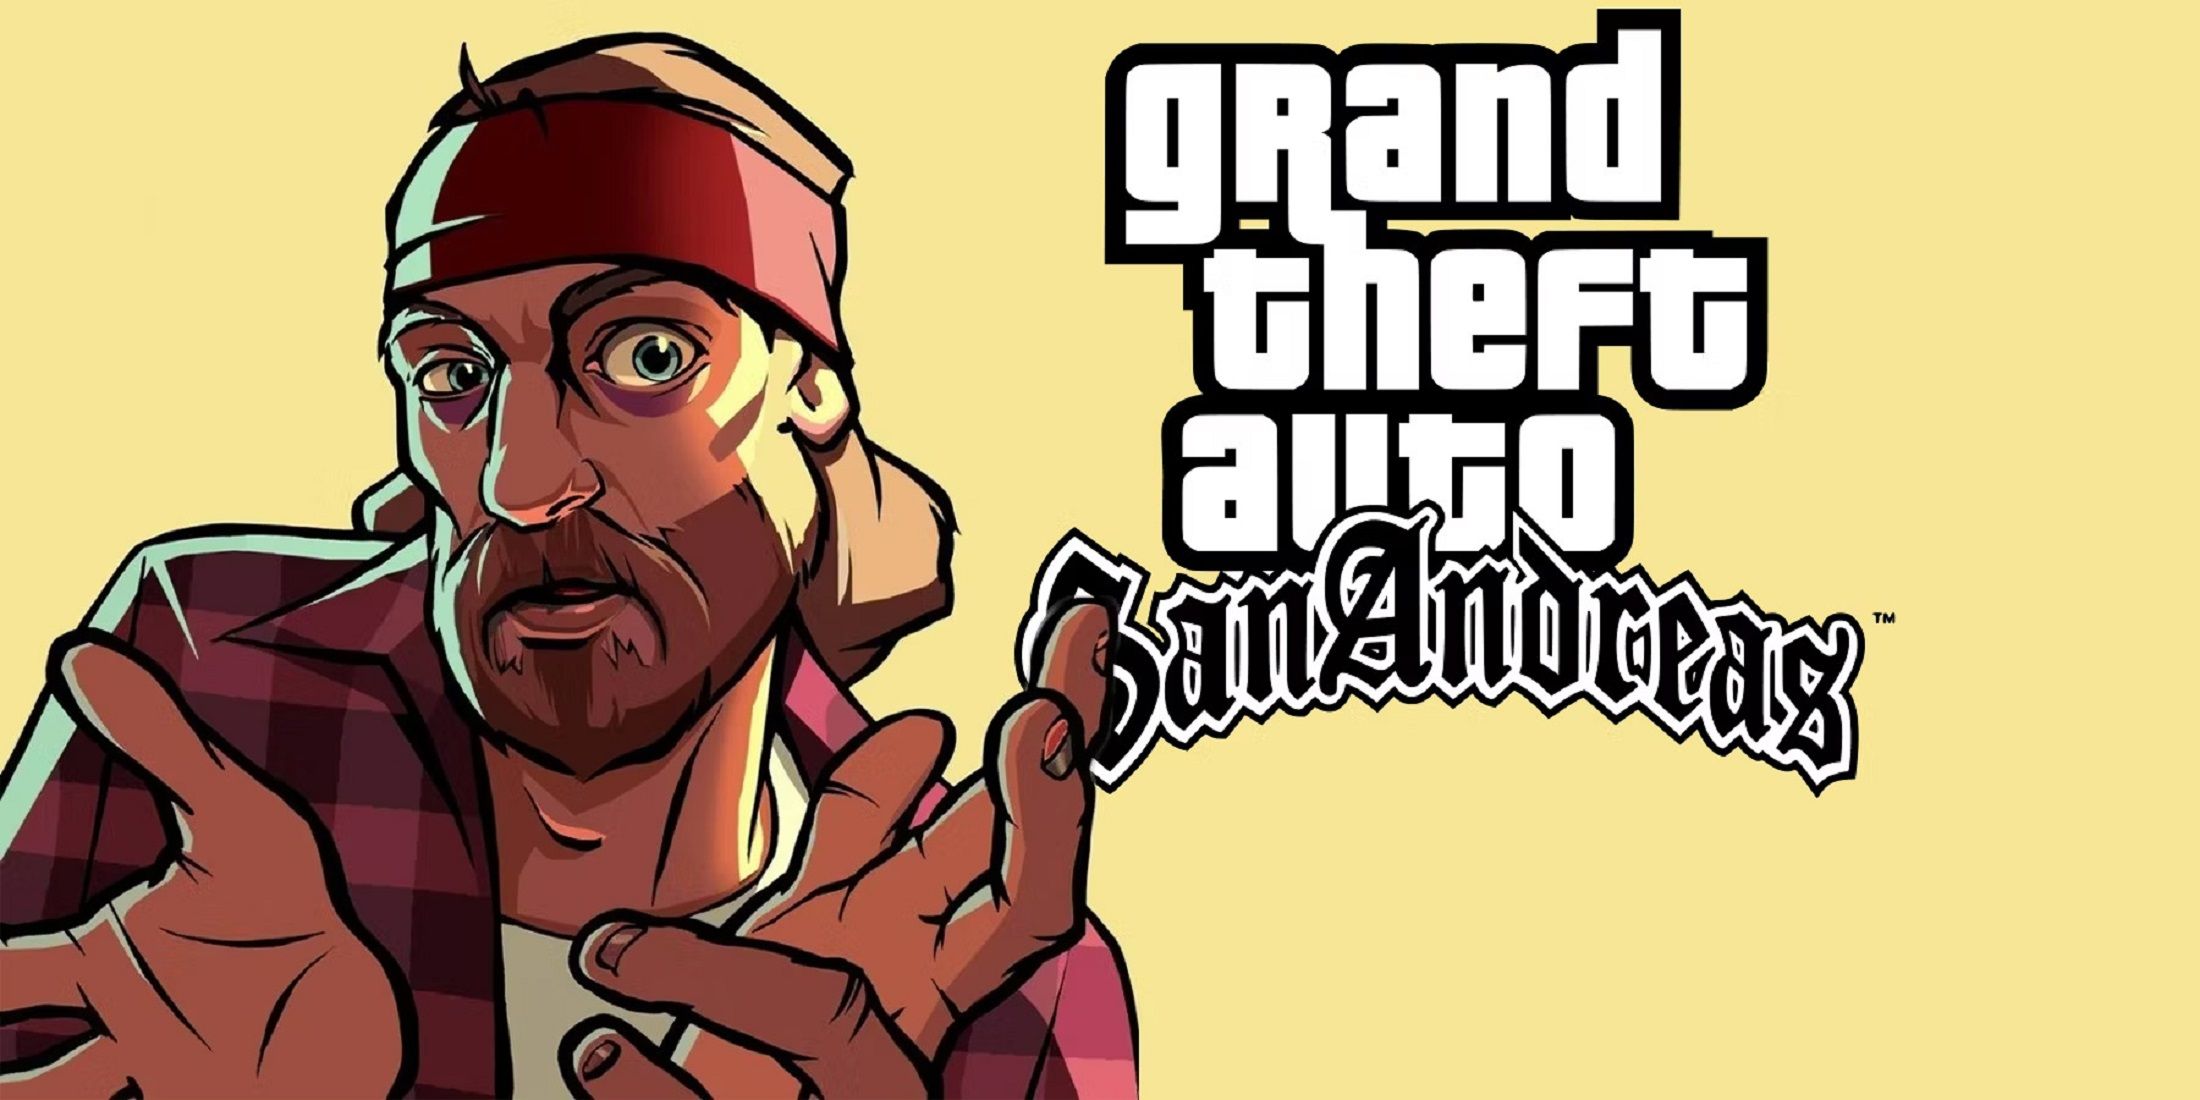 GTA San Andreas VR port gets a positive status update after a long time since being announced.